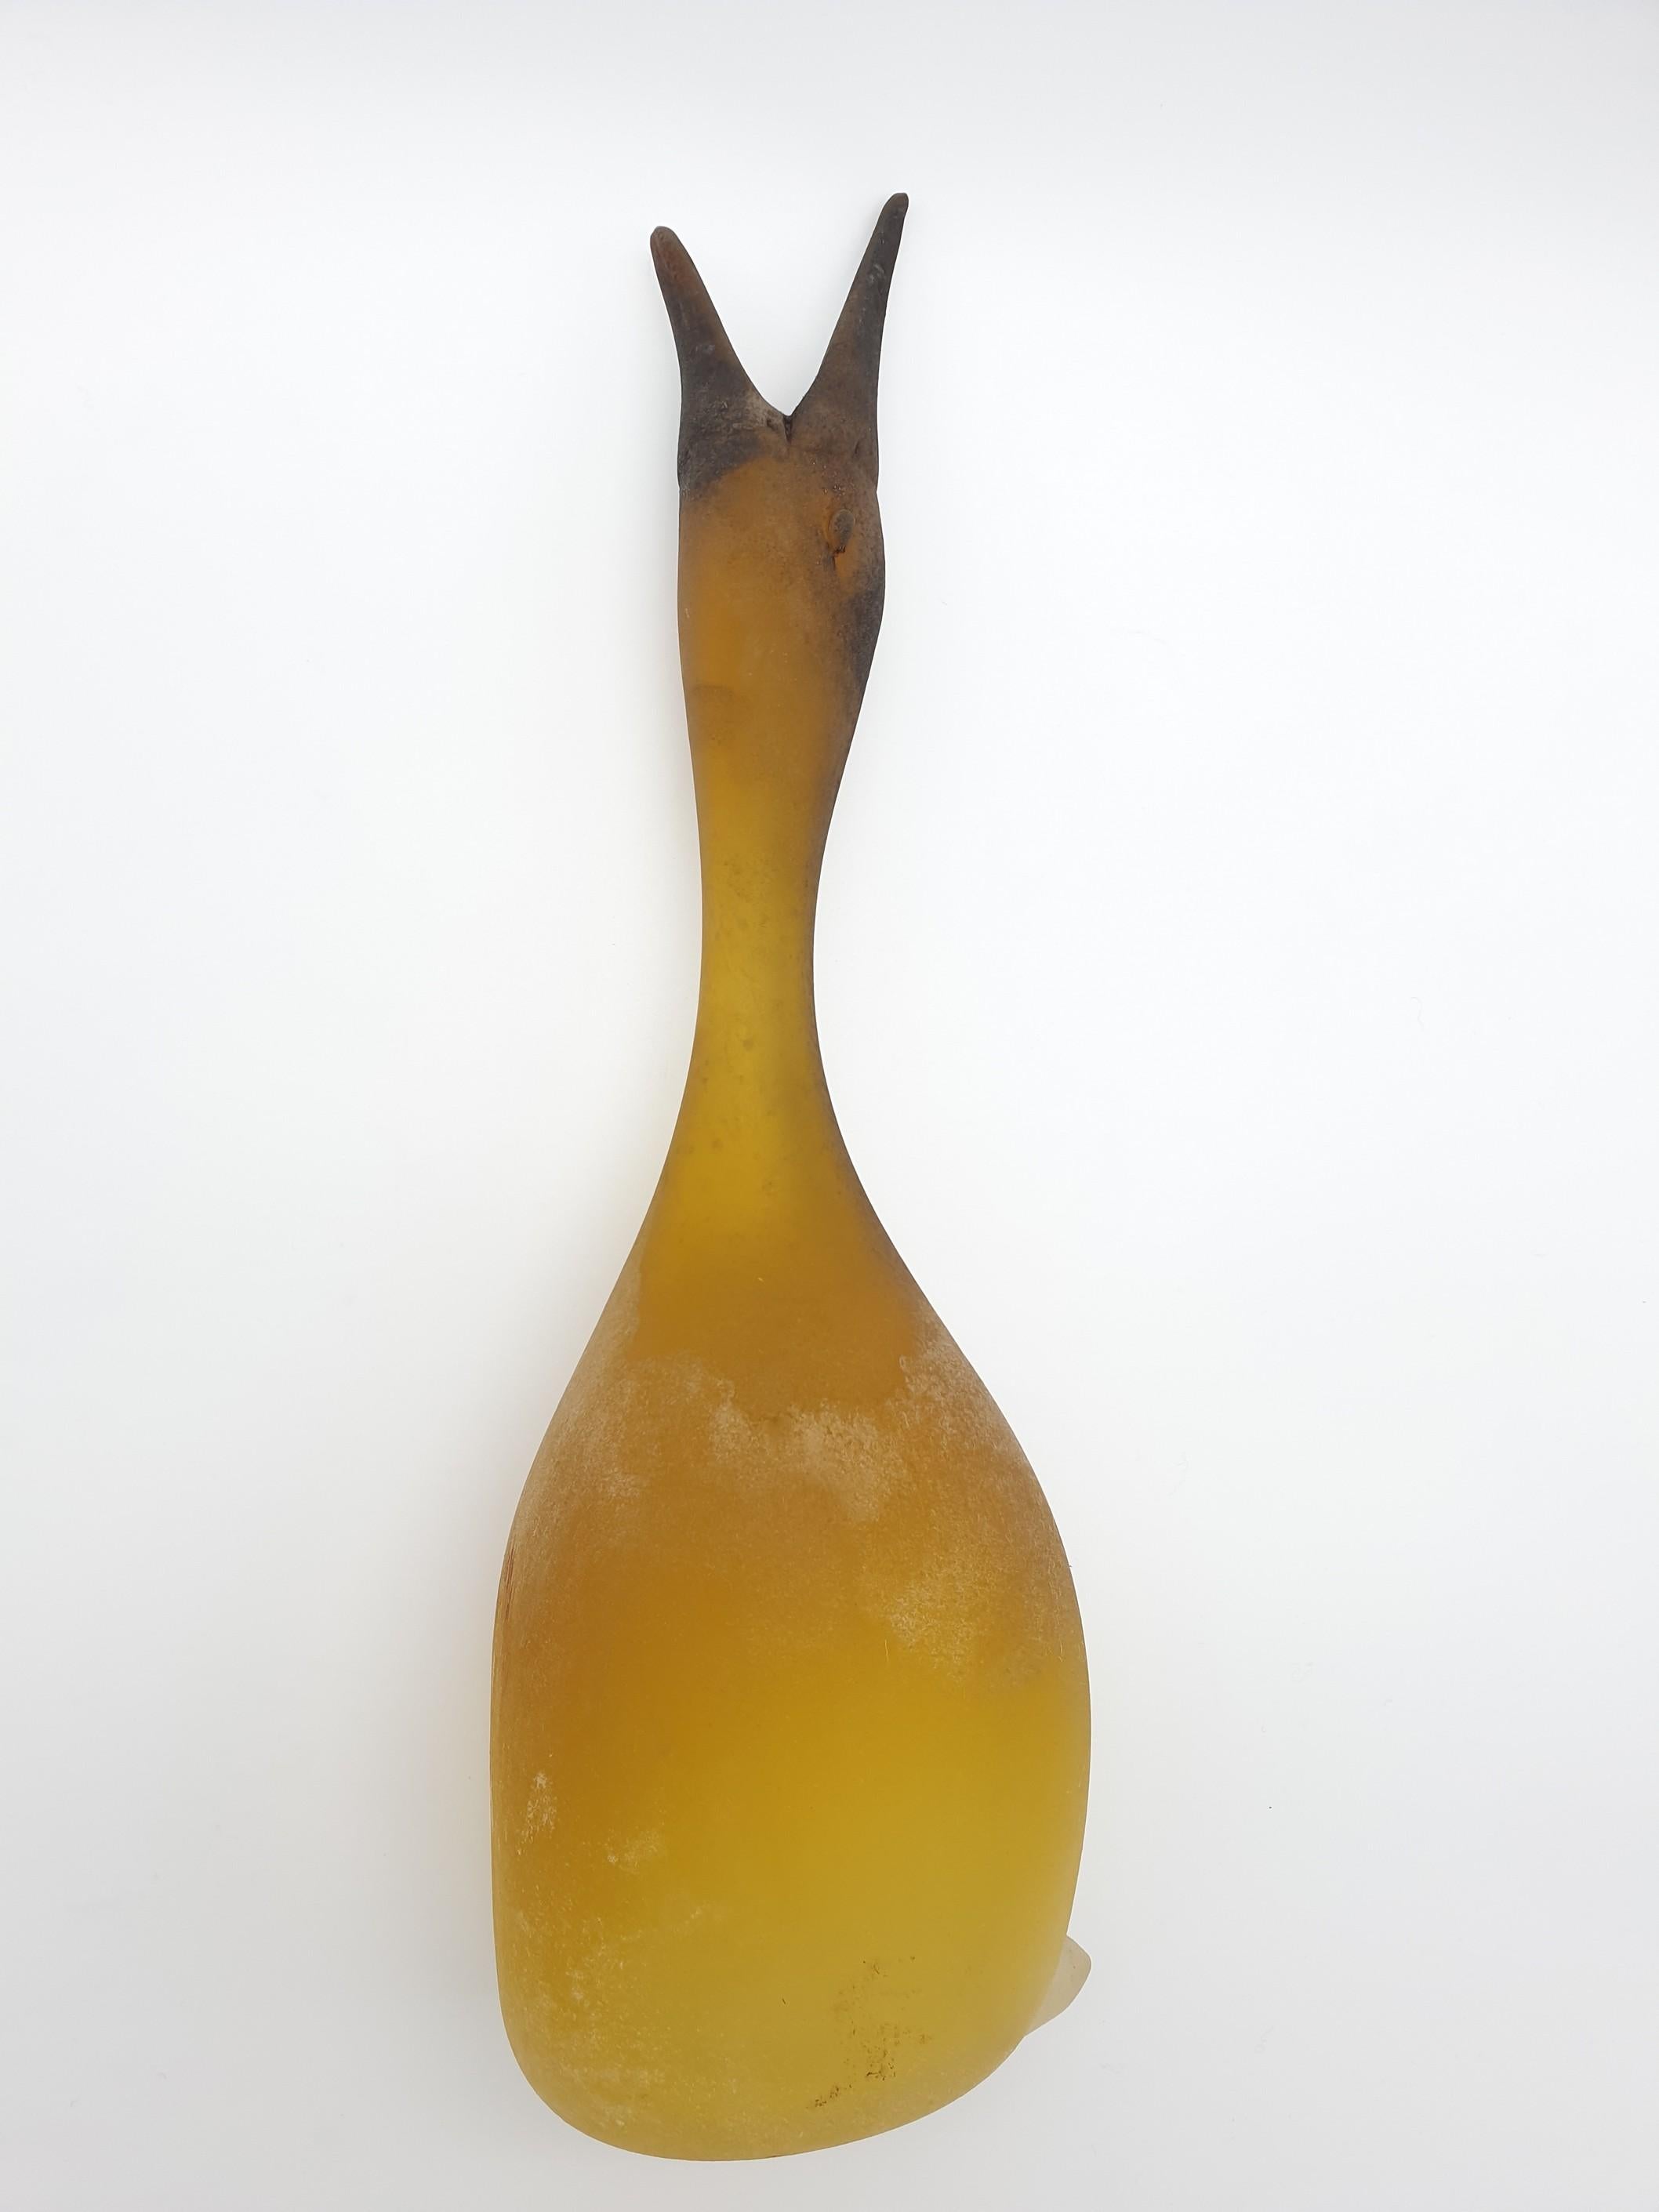 Modern Large Murano Glass Duck Vase by Antonio Da Ros at Gino Cenedese, 1960s For Sale 7